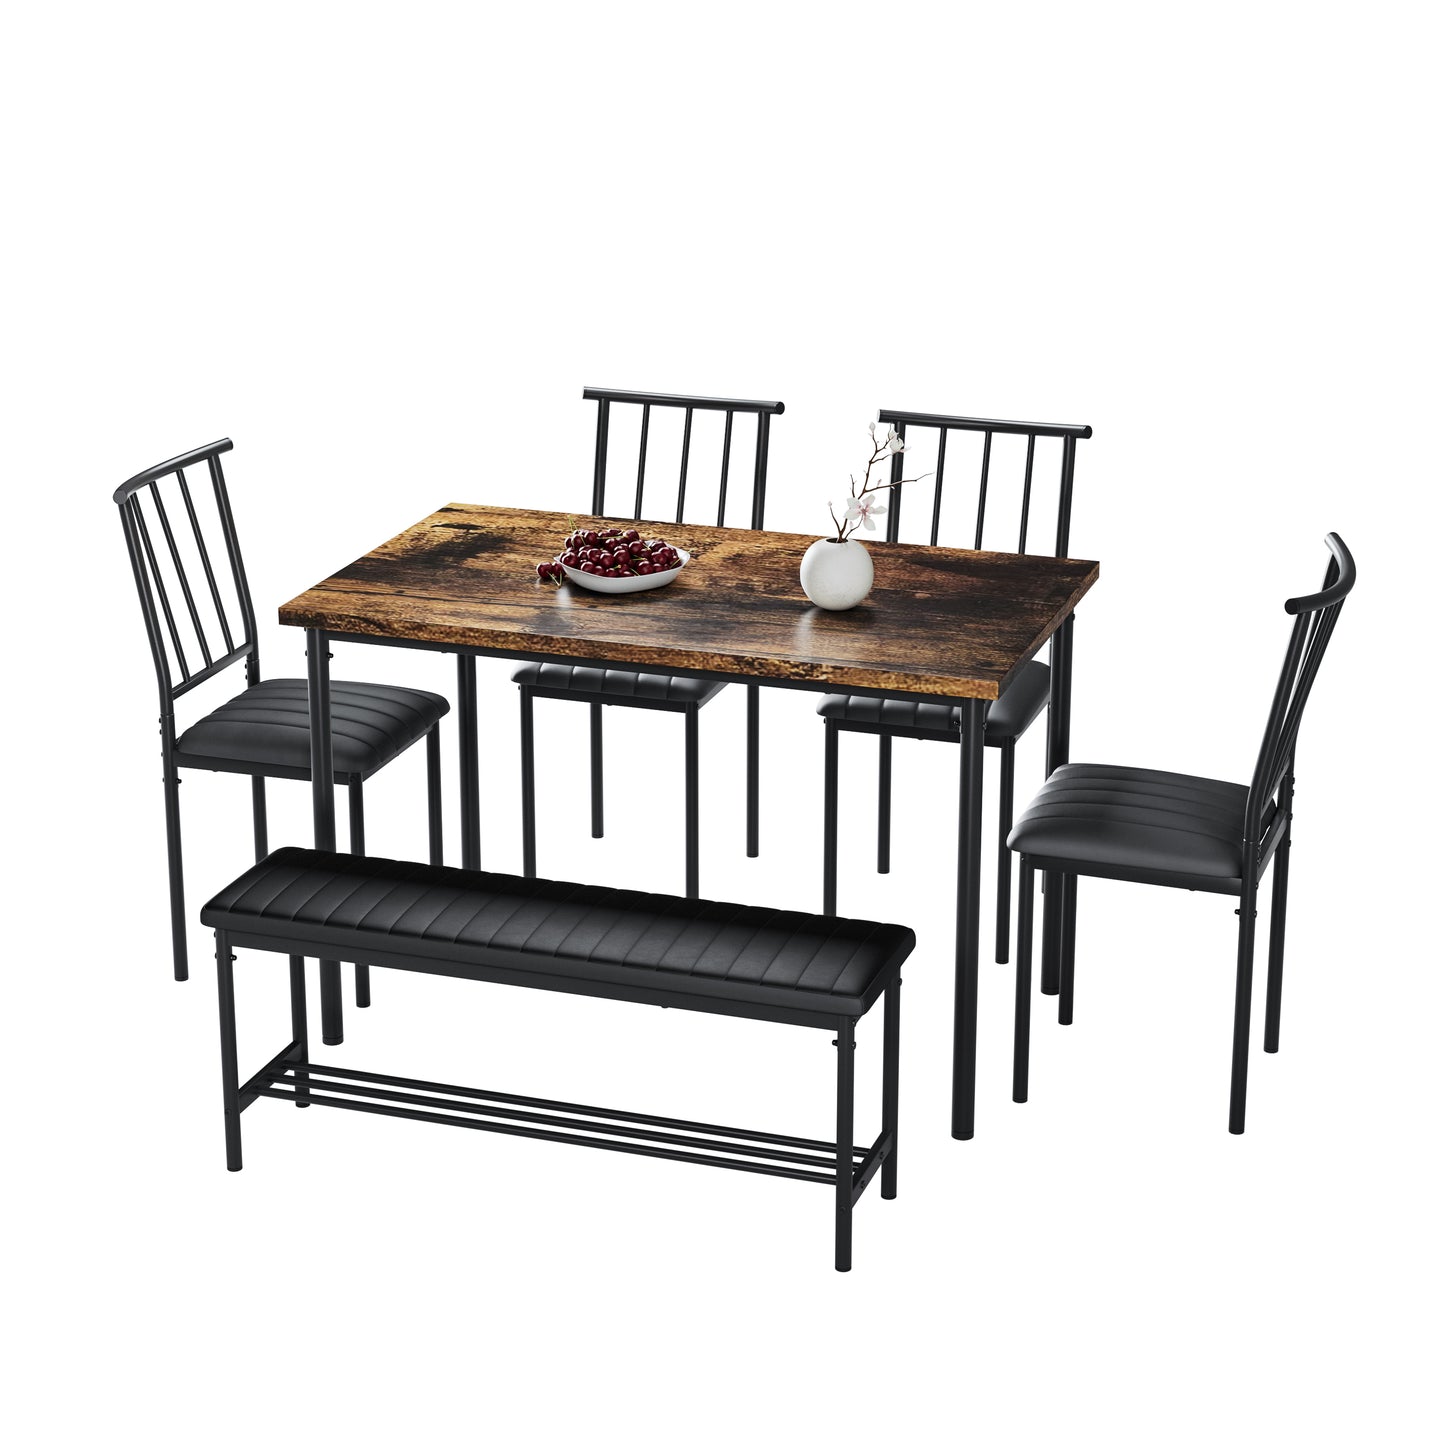 Dining Room Set for 6, Industrial 6 Piece Dining Set with Bench, Kitchen Dining Set with Upholstered Chairs and Bench, Dining Set with Storage Rack for Dining Room, Kitchen and Apartment, Brown